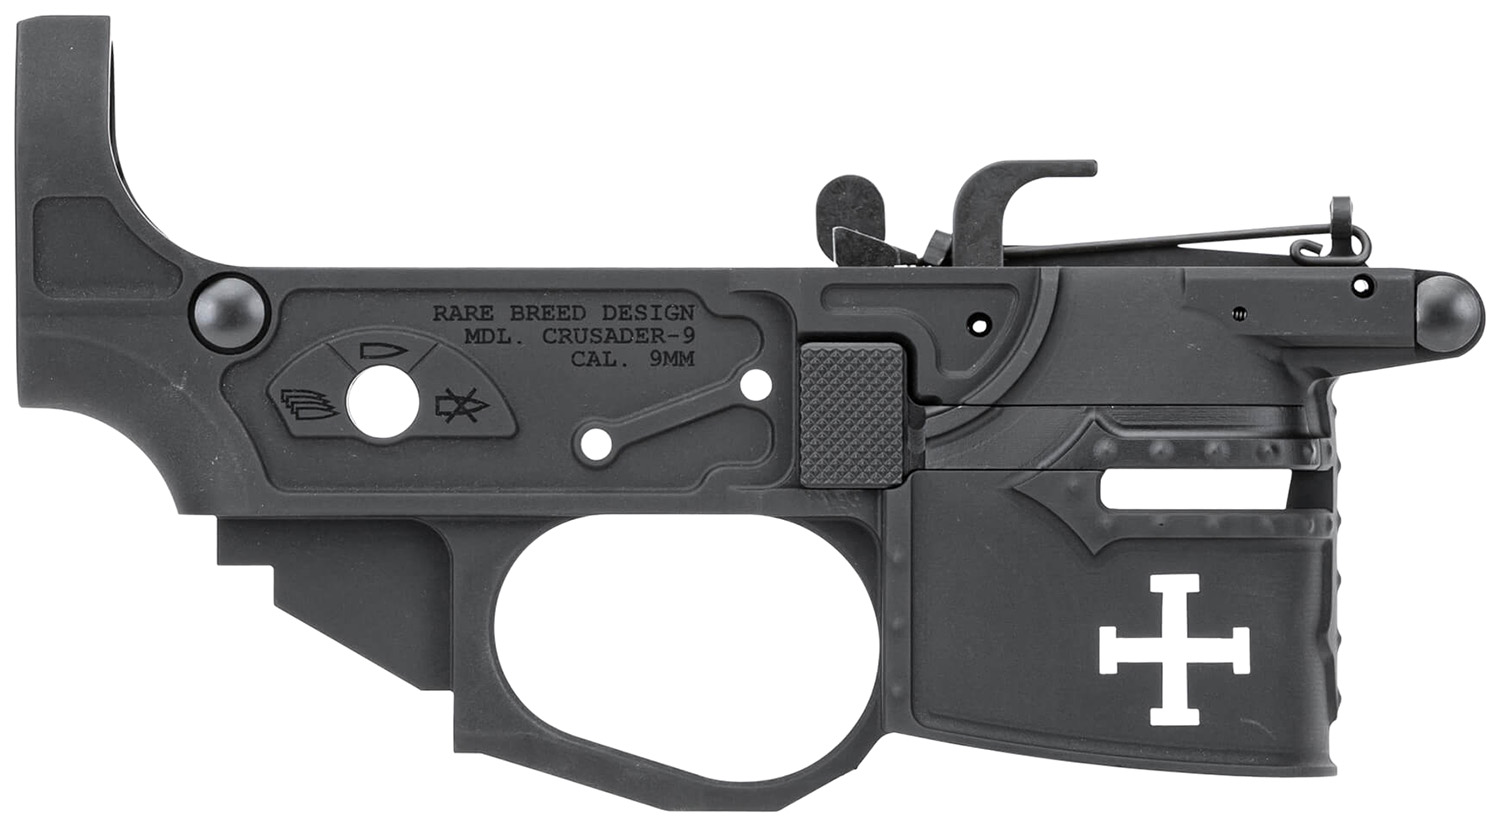 Spikes Tactical STLB960 Rare Breed Crusader  9mm Luger, Black Anodized Aluminum for AR-Platform